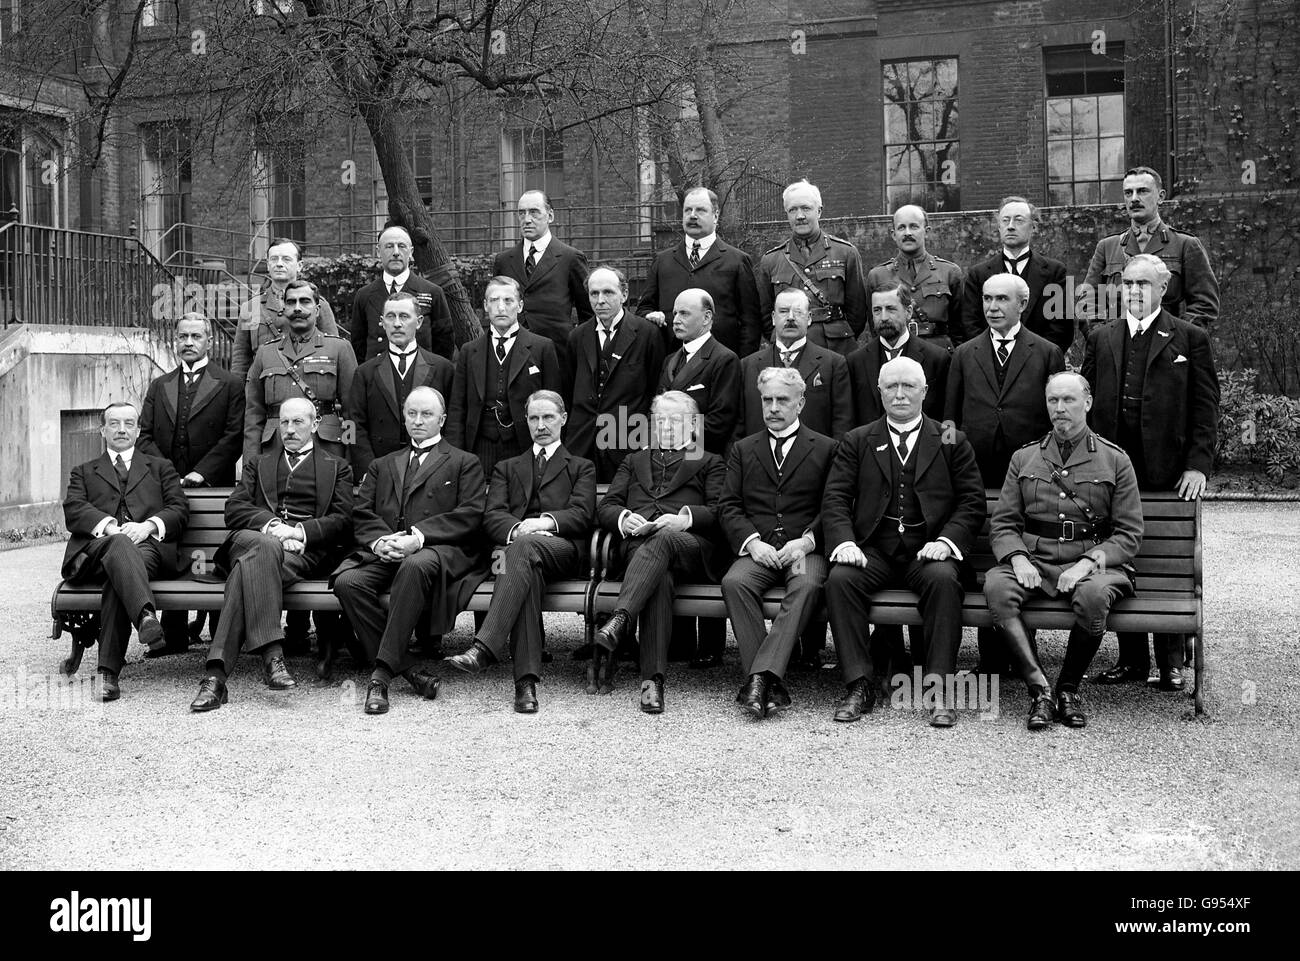 Group photo taken in the garden of number 10 Downing Street. Front row (left to right): Leader of the Labour Party,Arthur Henderson; Sir Alfred Milner; Leader of the House of Lords, Lord Curzon; Chancellor of the Exchequer, Andrew Bonar Law; The Prime Minister, David Lloyd George; Prime Minister of Canada, Robert Borden; Joint Prime Minister of New Zealand, William Ferguson Massey; Commander-in-Chief South African Defence Force General Jan Christiaan Smuts; (Middle Row, left to right) Sir Satyendra Prasanno Sinha; Maharajah Ganga Singh; Sir James Scorgie Meston; Mr Austen Chamberlain; Stock Photo